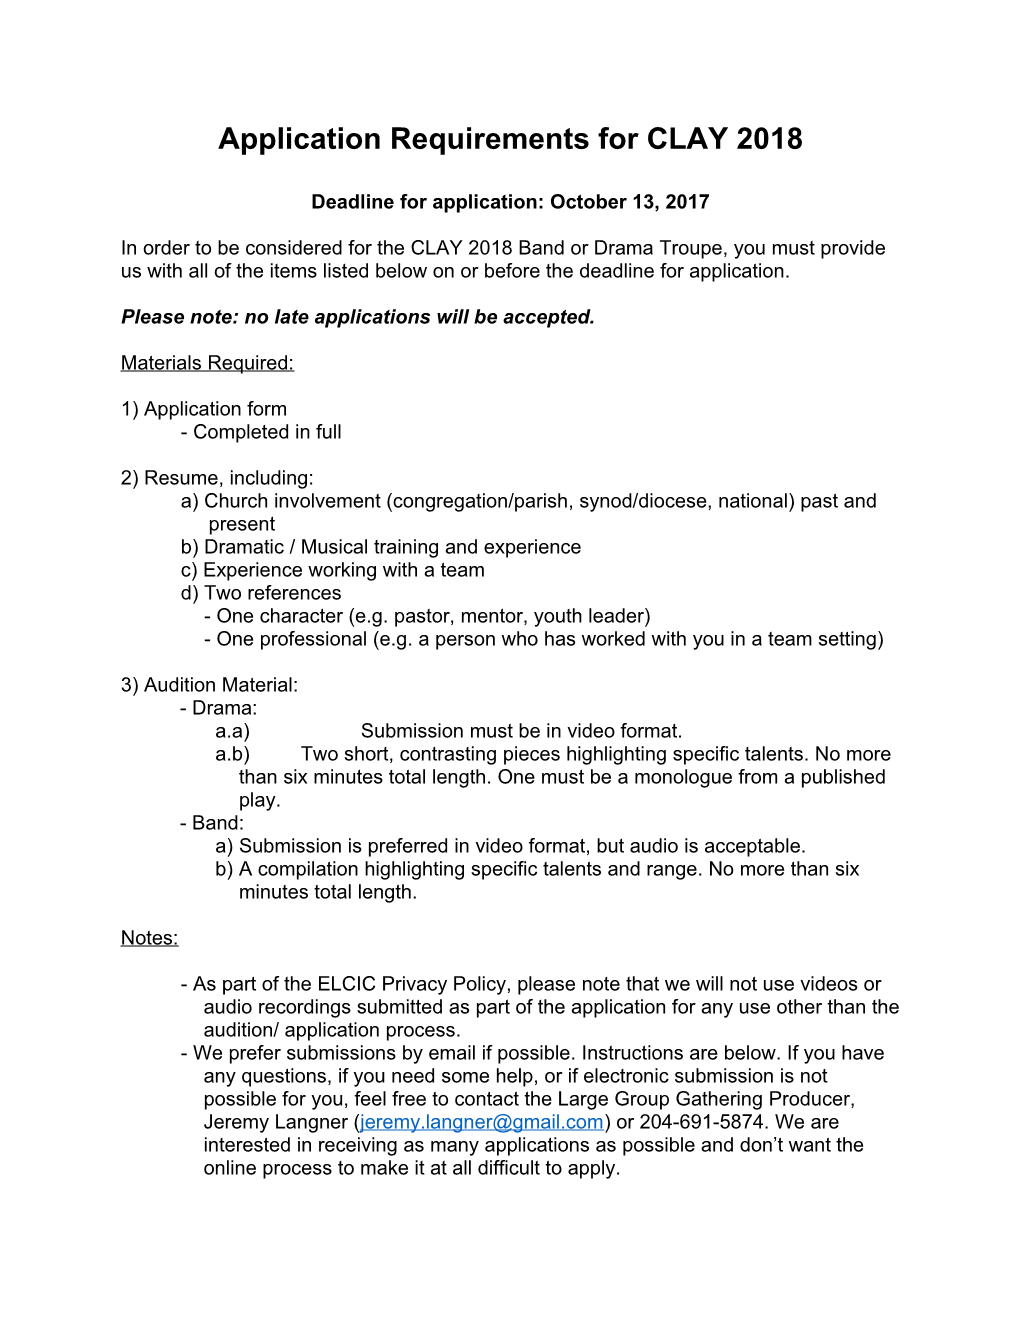 Application Requirements for CLAY 2018